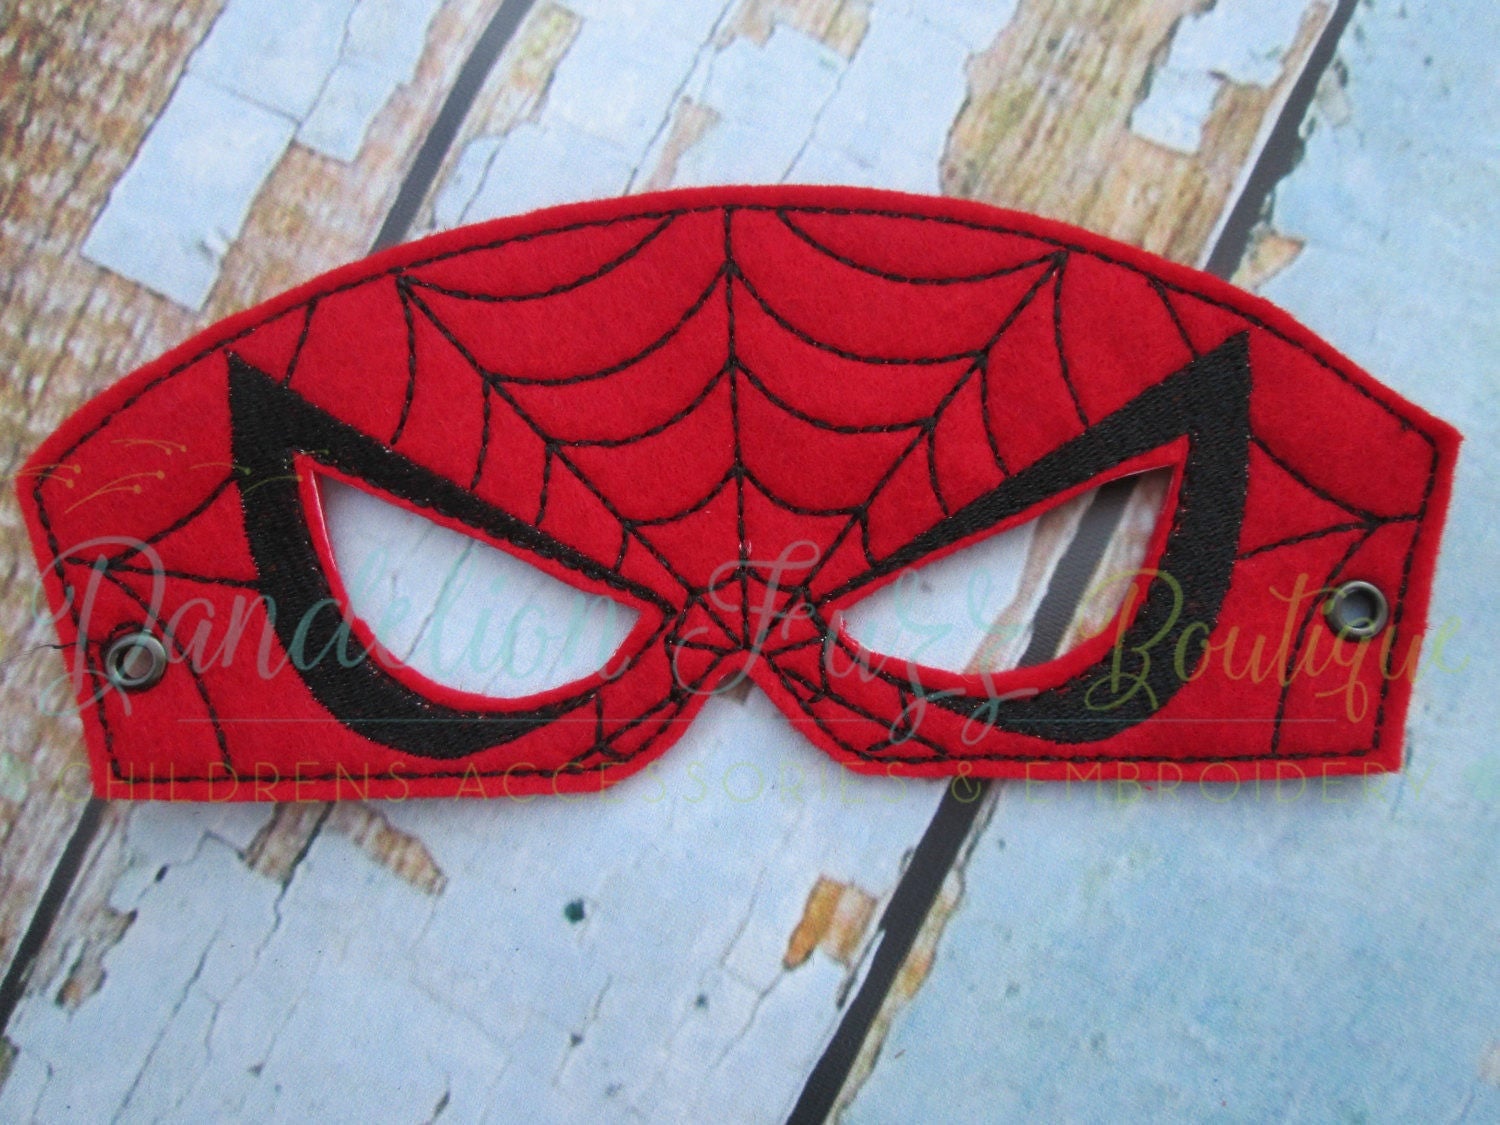 Spiderman Inspired Felt Mask, Spiderman Inspired Dress Up and Party Favor Mask, Pretend Play, Spiderman Party, Spiderman Gift, Present